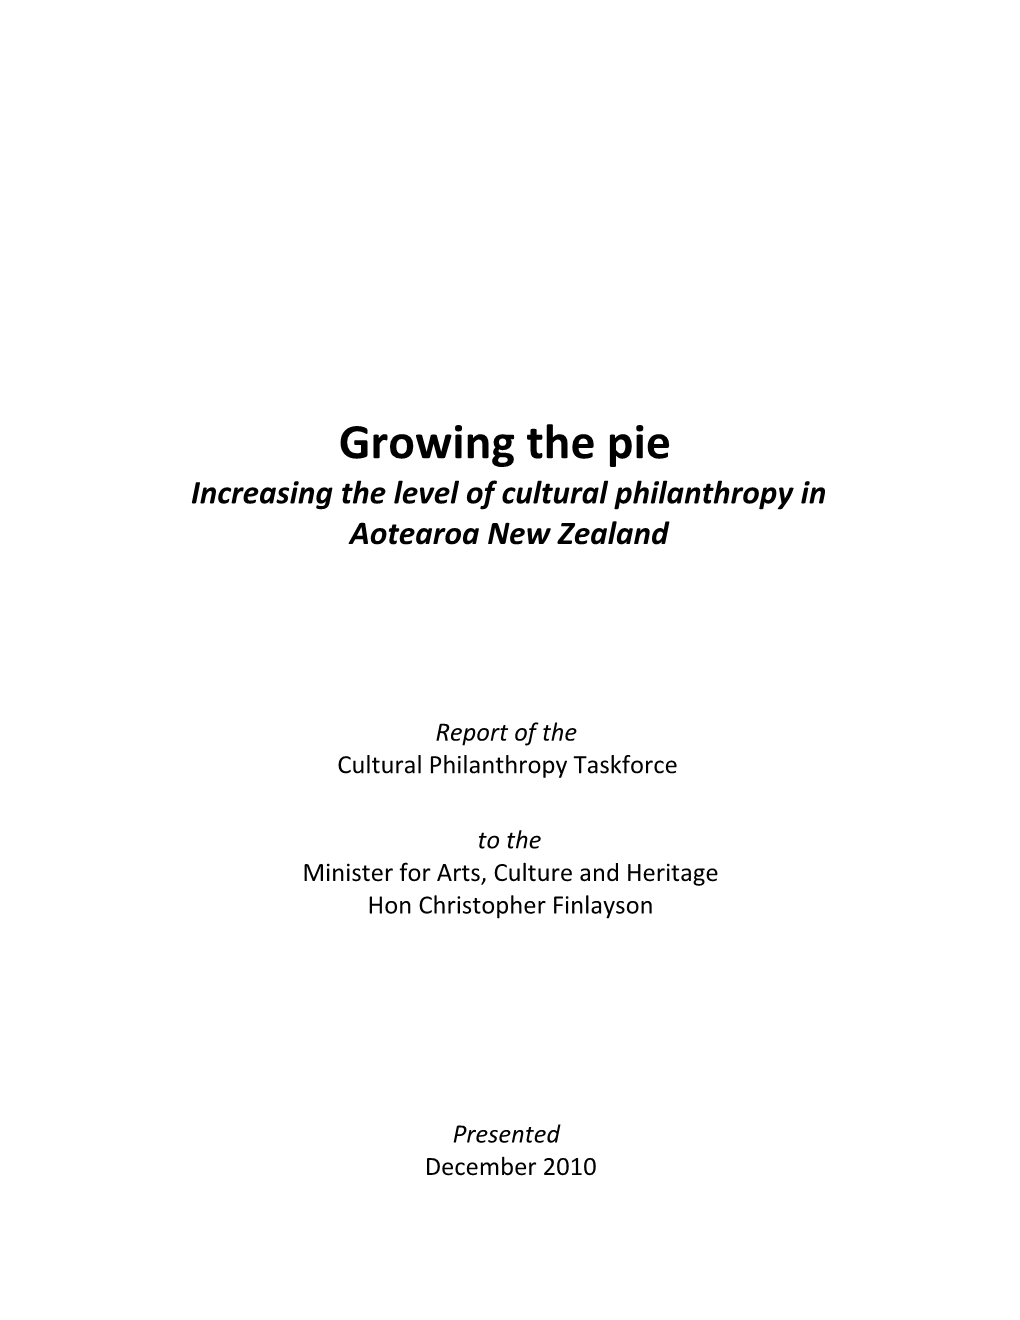 Growing the Pie Increasing the Level of Cultural Philanthropy in Aotearoa New Zealand